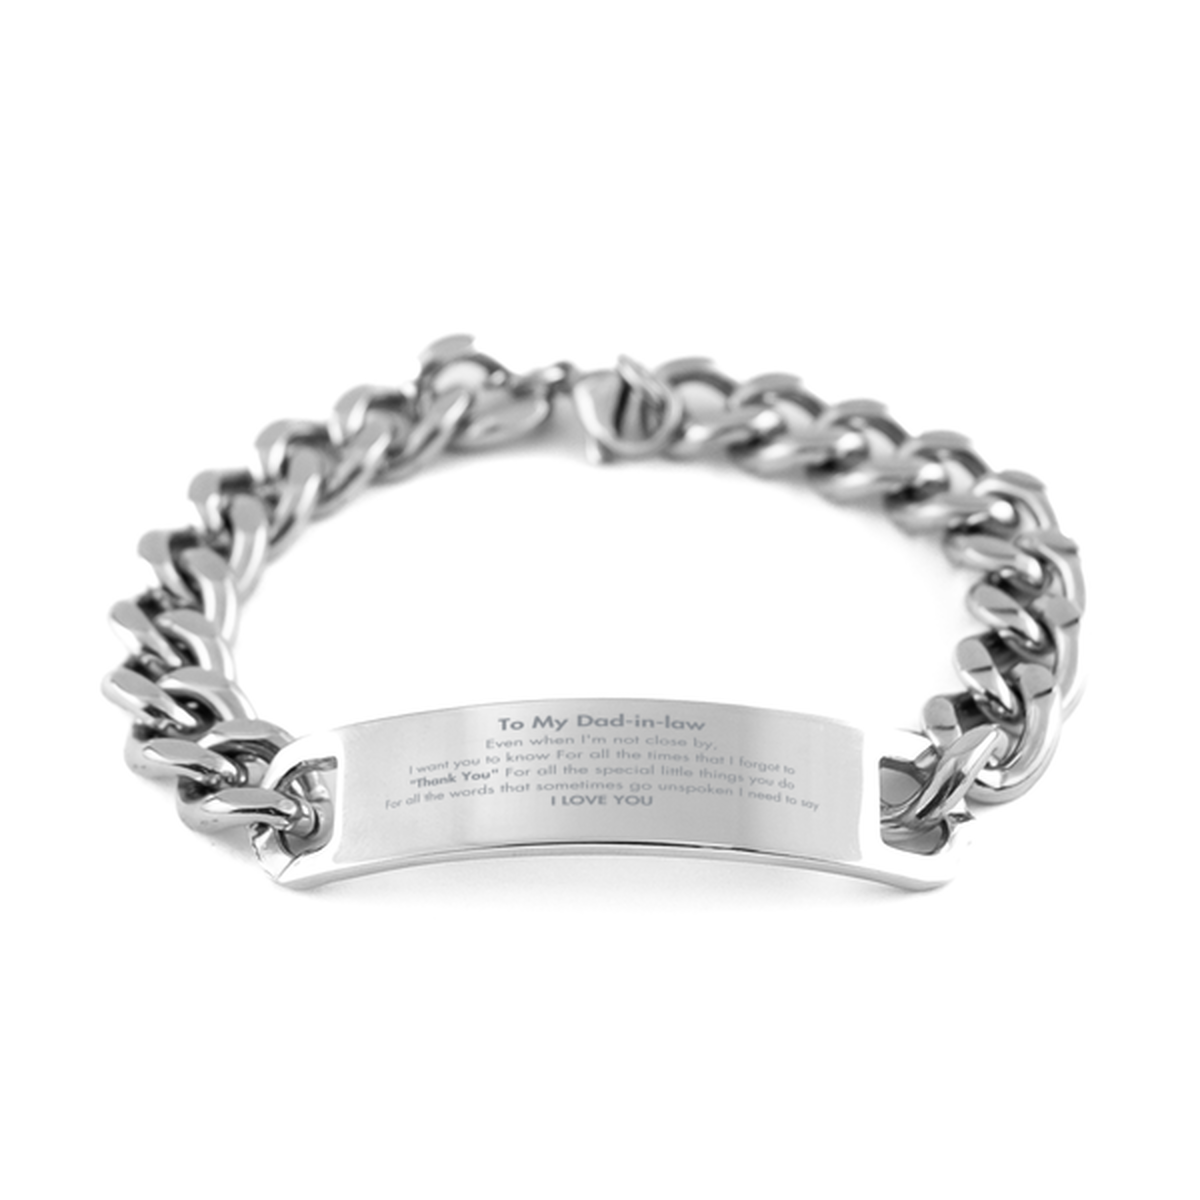 Thank You Gifts for Dad-in-law, Keepsake Cuban Chain Stainless Steel Bracelet Gifts for Dad-in-law Birthday Mother's day Father's Day Dad-in-law For all the words That sometimes go unspoken I need to say I LOVE YOU